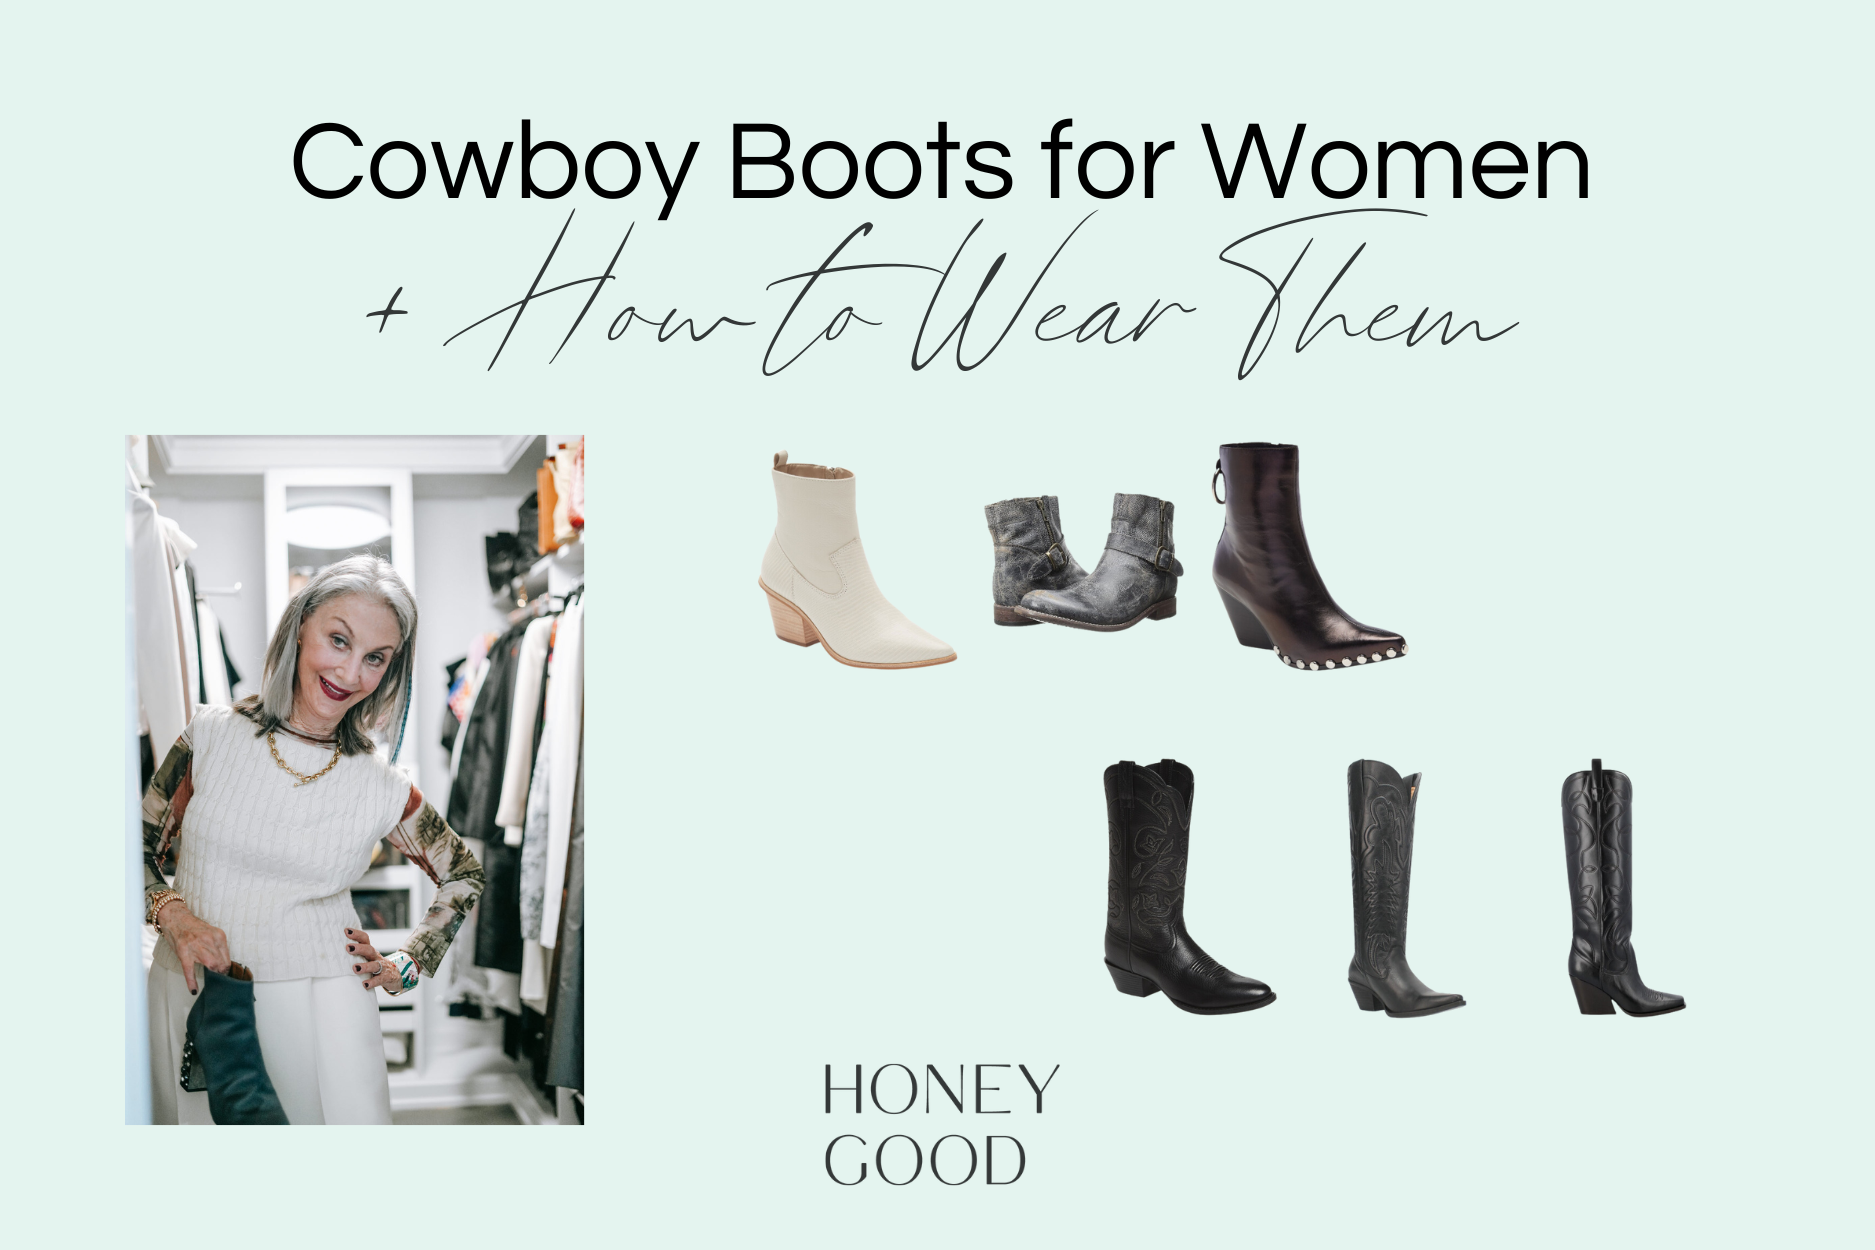 black cowboy boots for women showing how you can wear this style or change it up with any cowboy boots for women